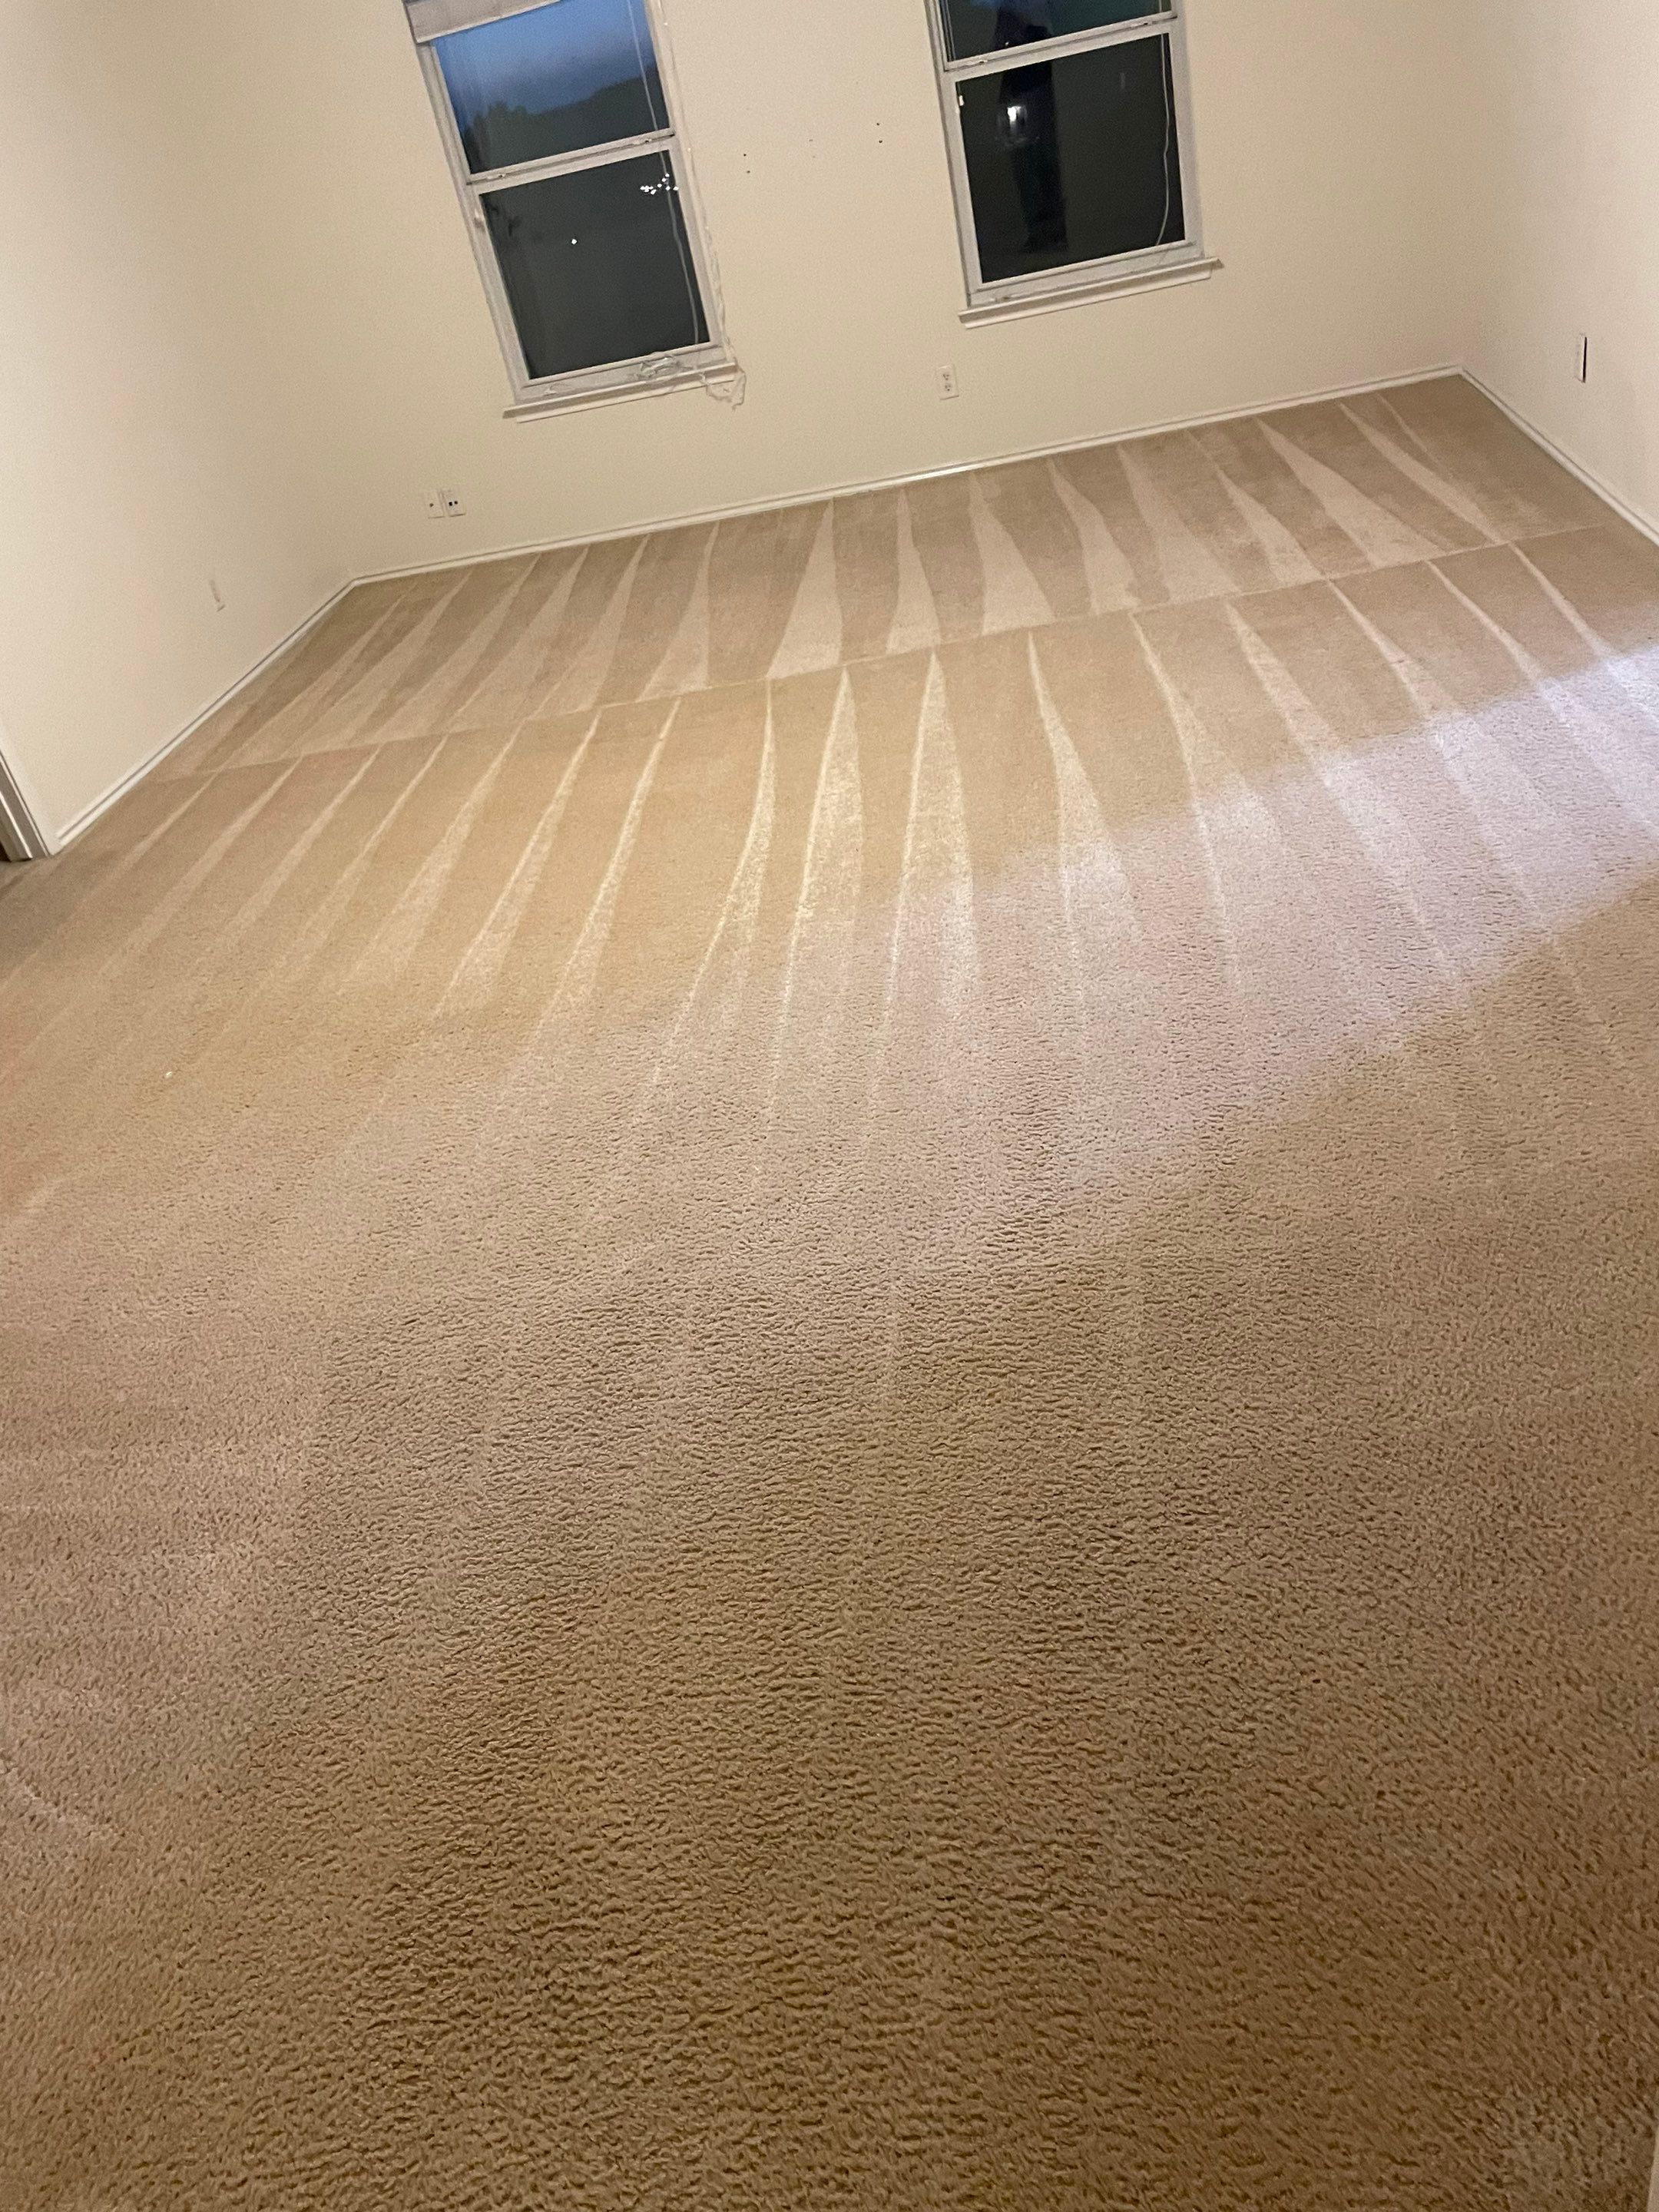 carpet cleaning company in san antonio cleaning and restoring a large carpeted room with visible clean lines